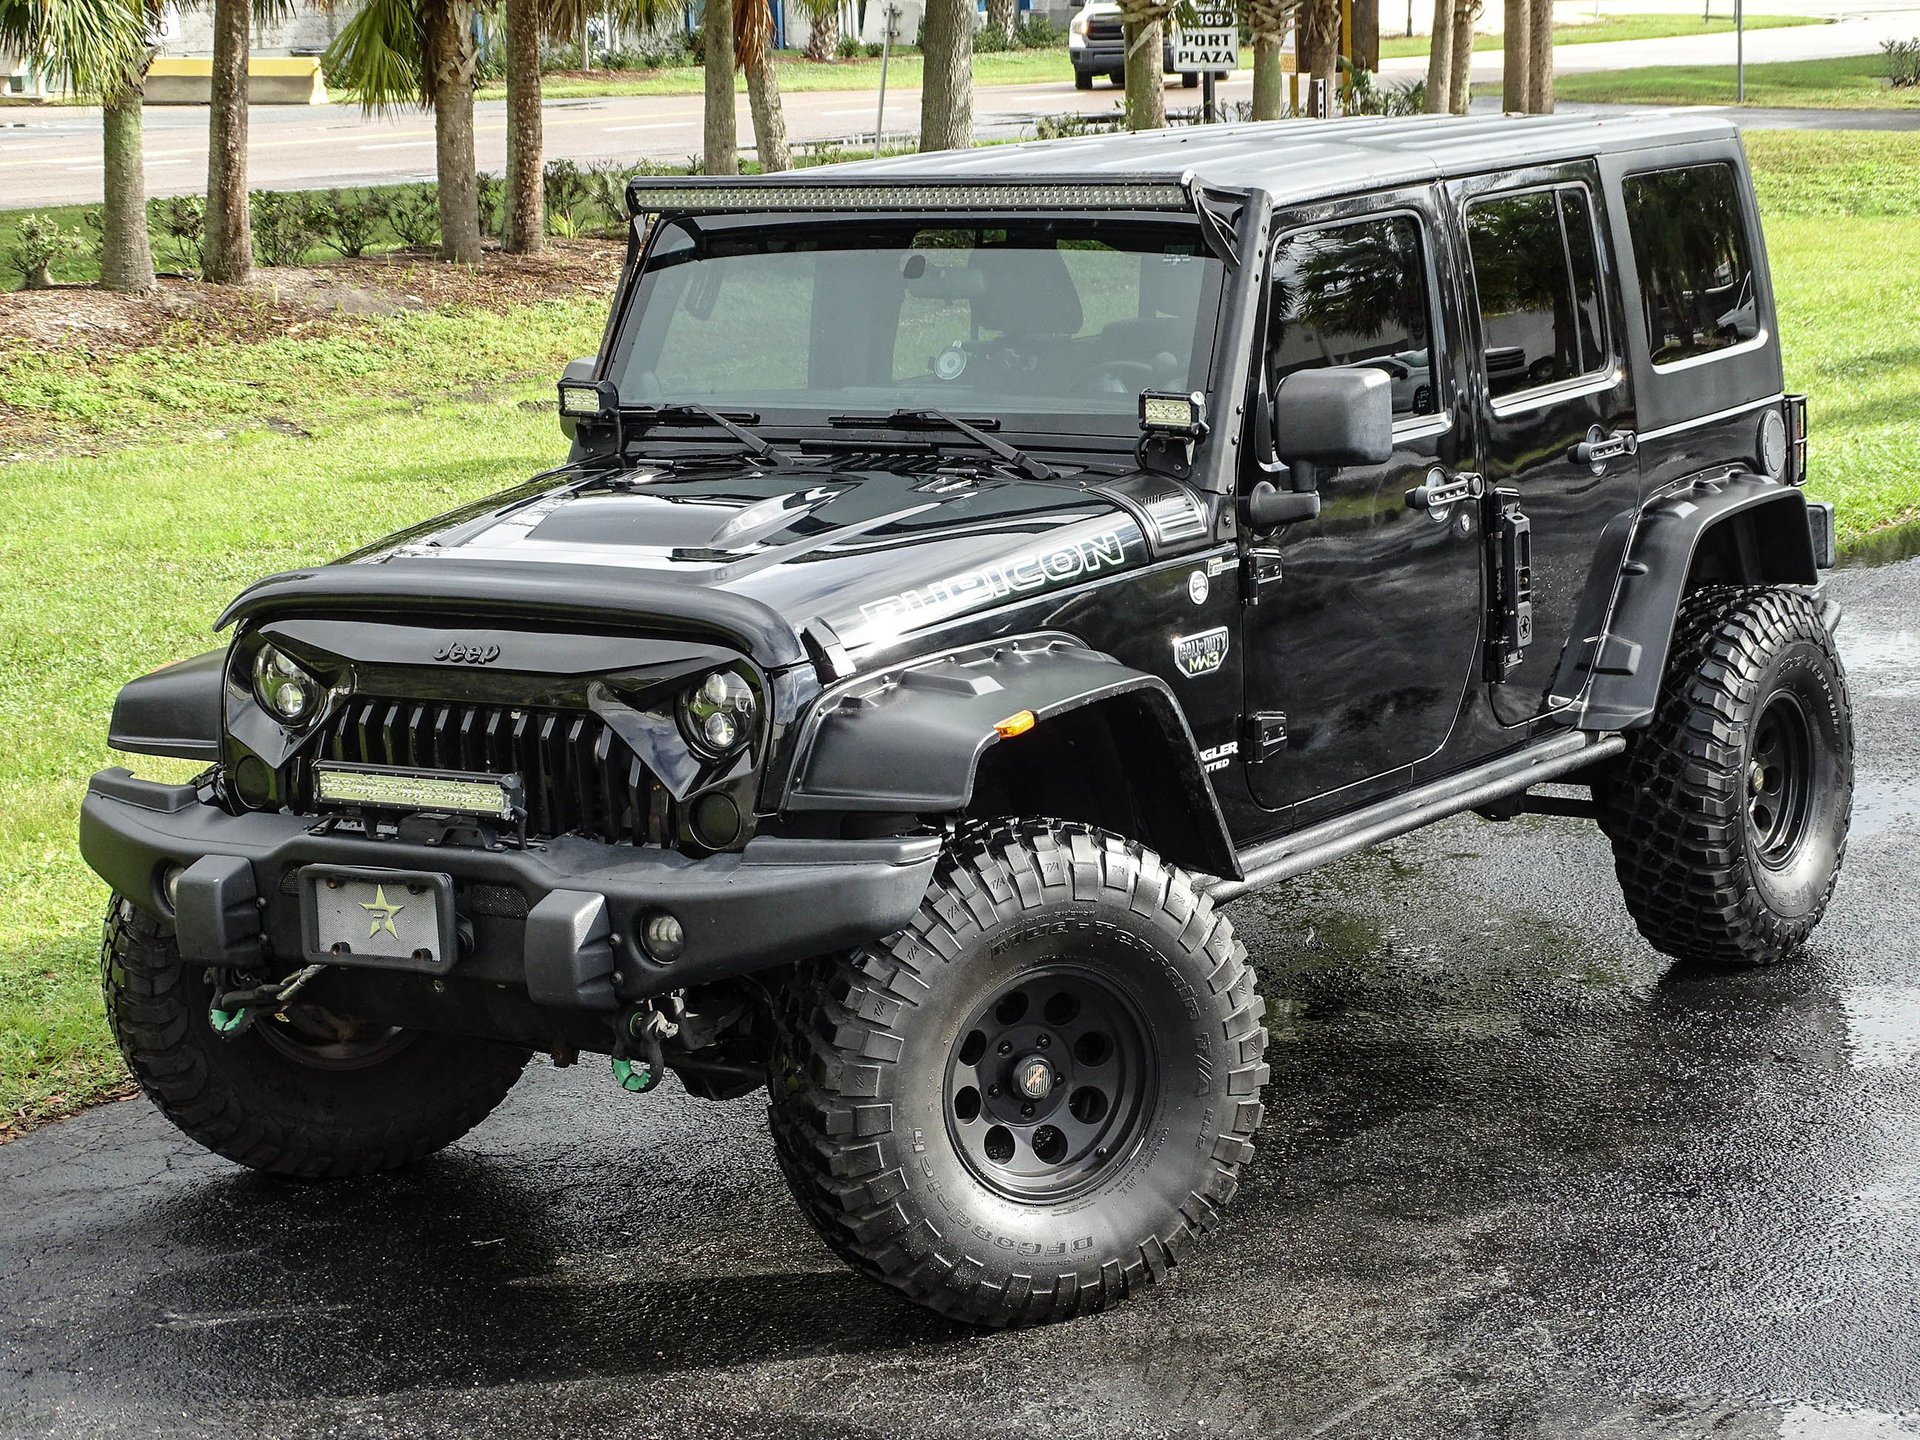 2012-jeep-wrangler-rubicon-mw3-call-of-duty-edition-auction-09